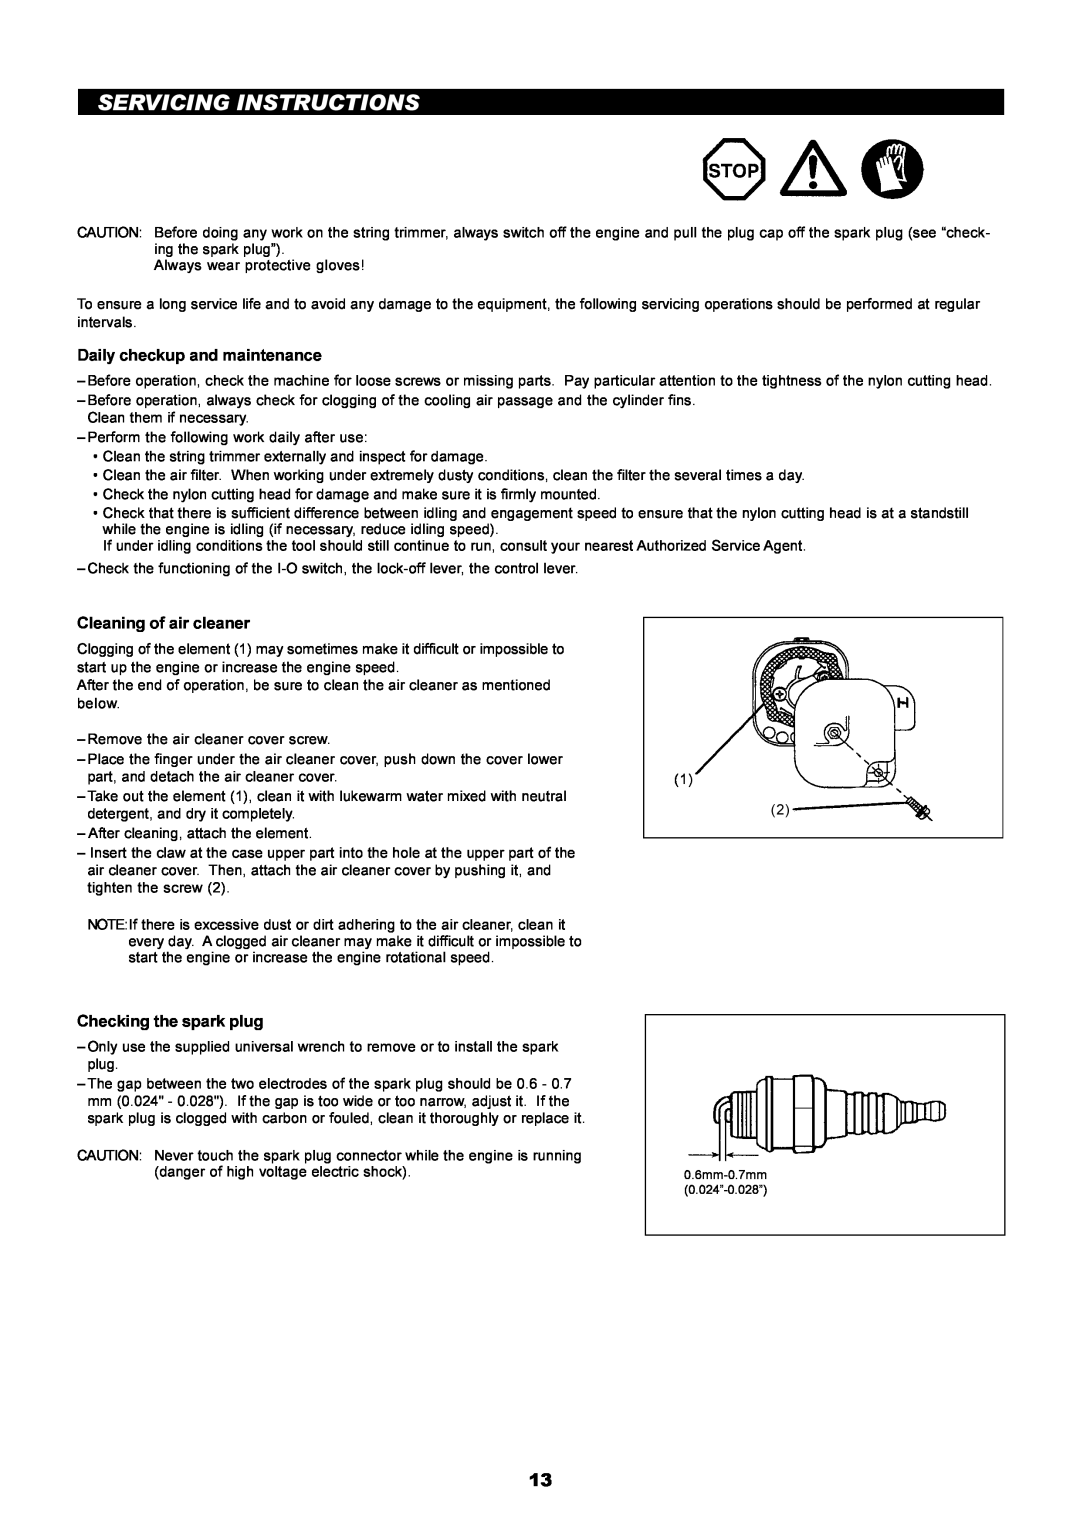 Makita LT-210 Servicing Instructions, Daily checkup and maintenance, Cleaning of air cleaner, Checking the spark plug 